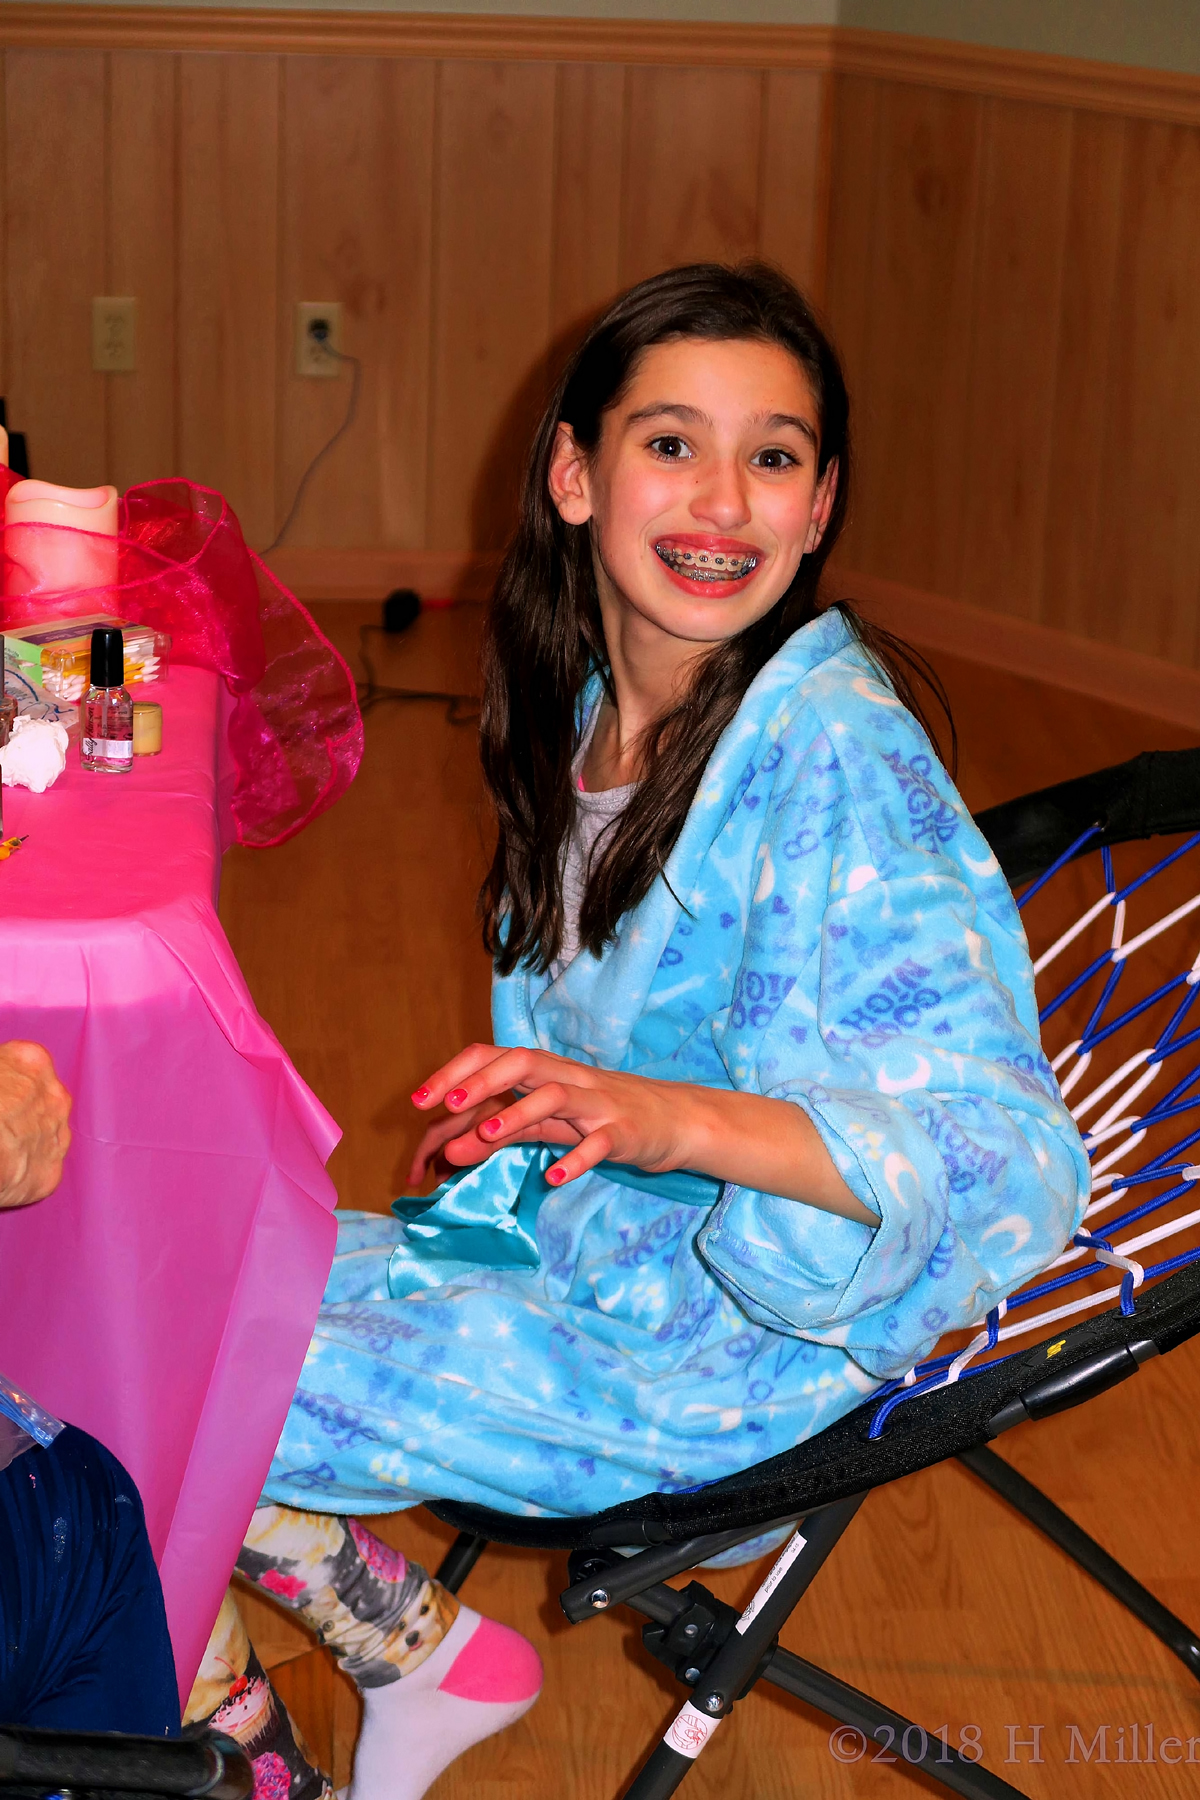 Mini Manicure Is An Important And Fun Part Of The Kids Spa Party! 